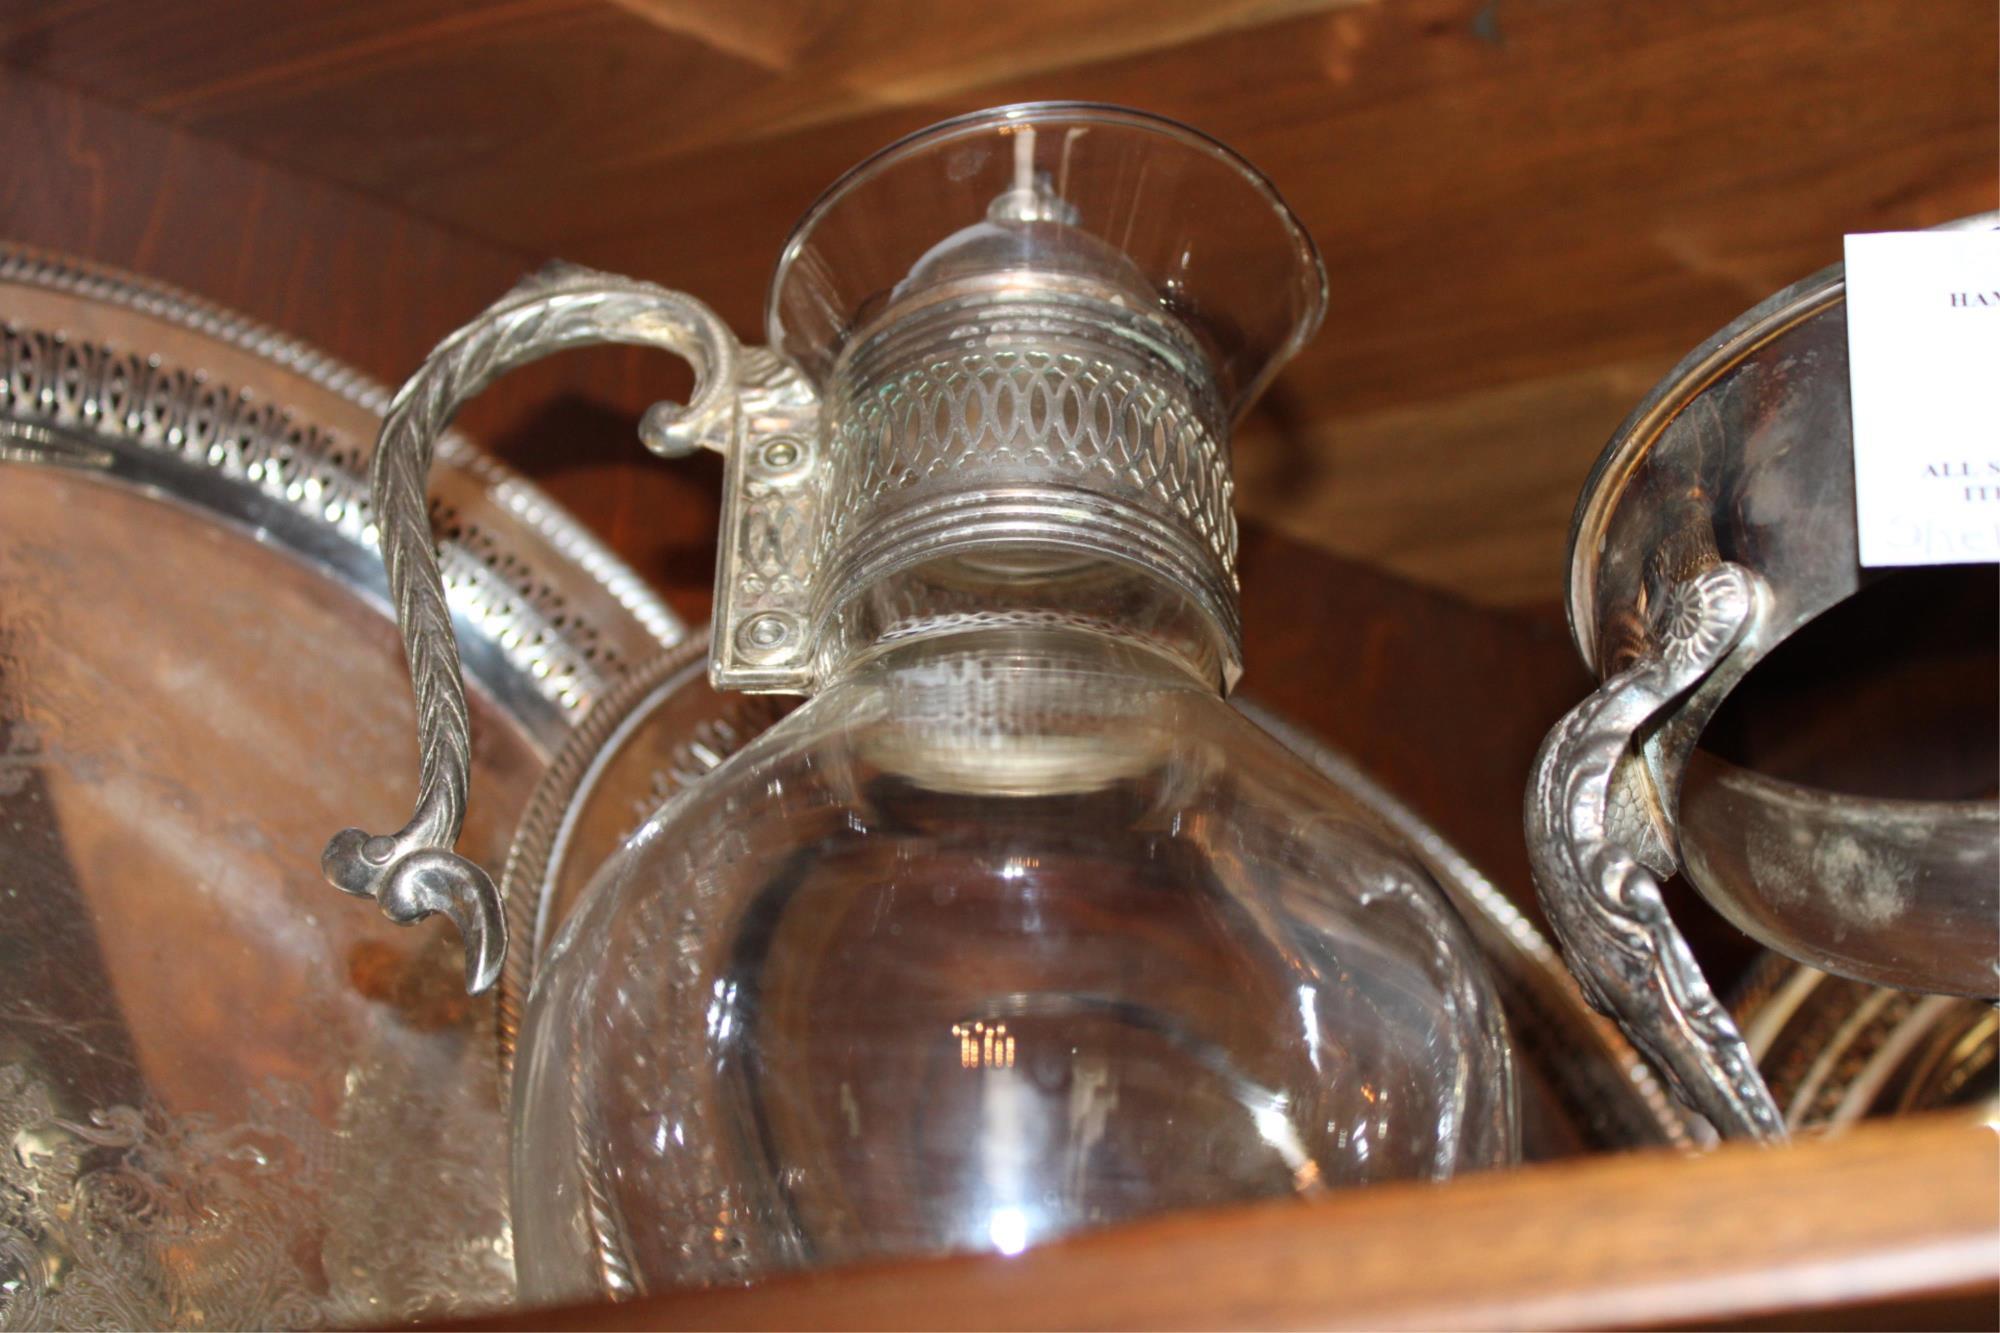 SIX PIECES OF SILVER PLATE SERVICE